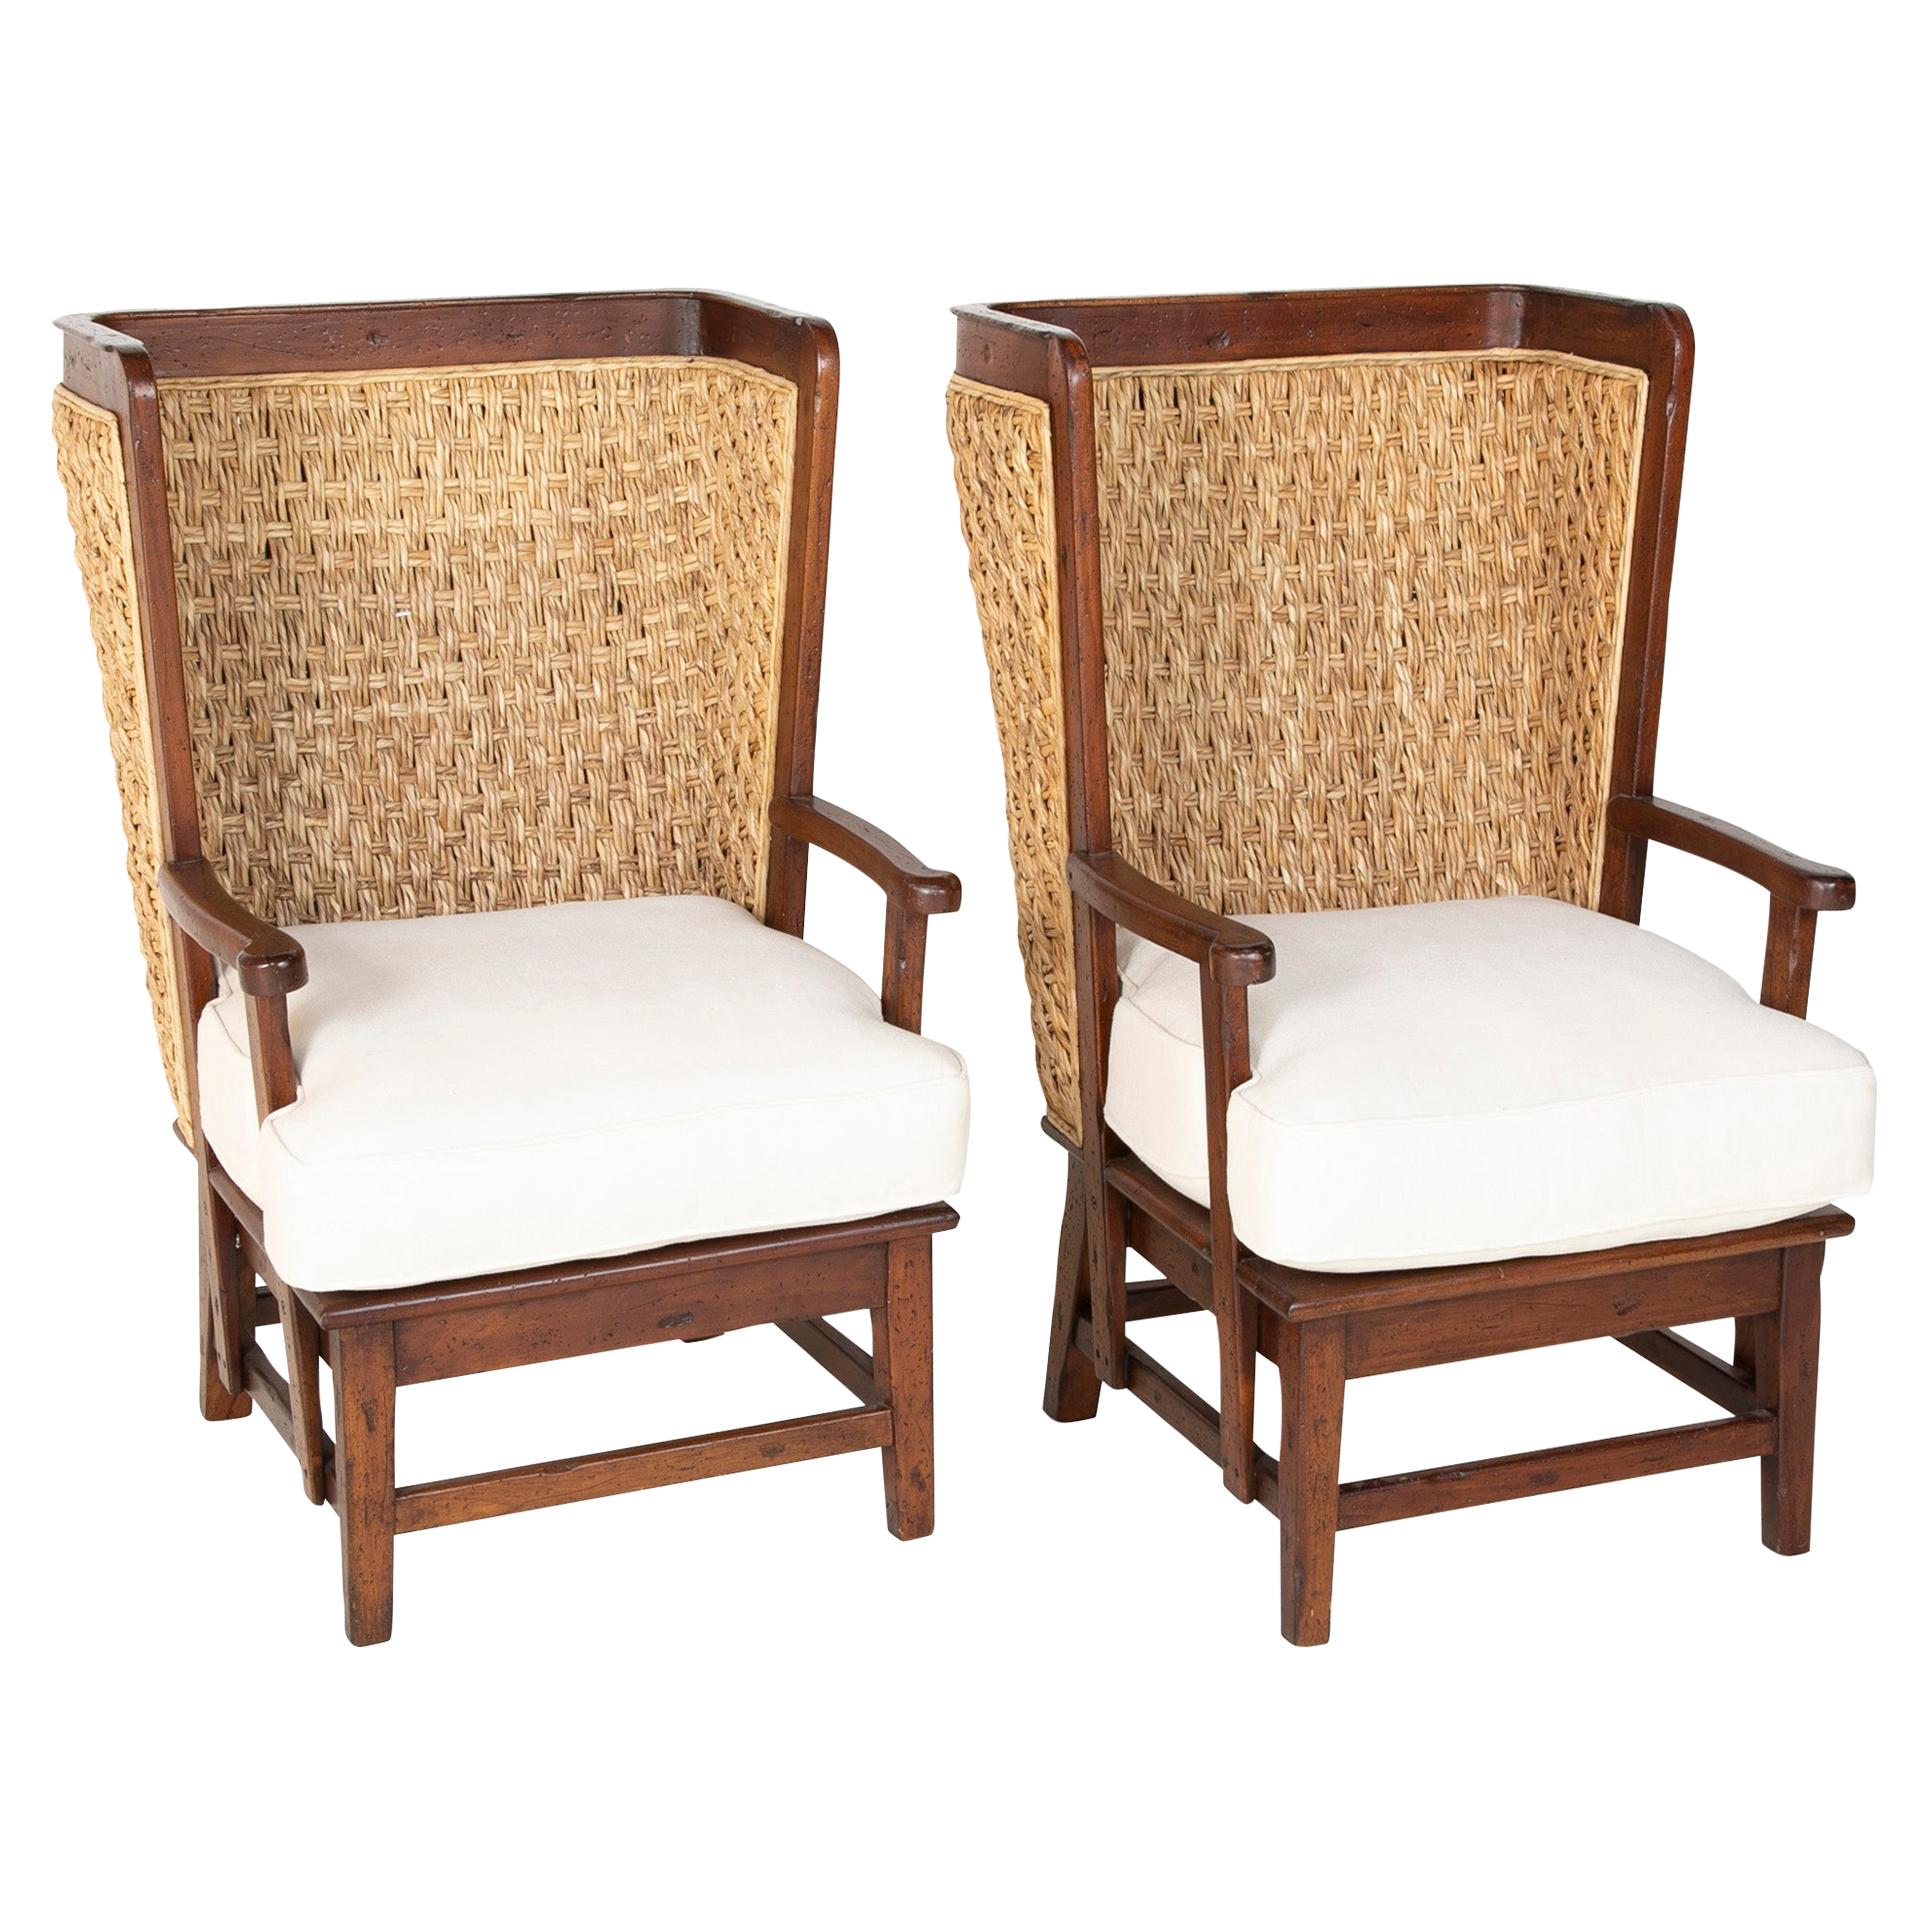 Pair of Ralph Lauren British Colonial Style Woven Back Armchairs